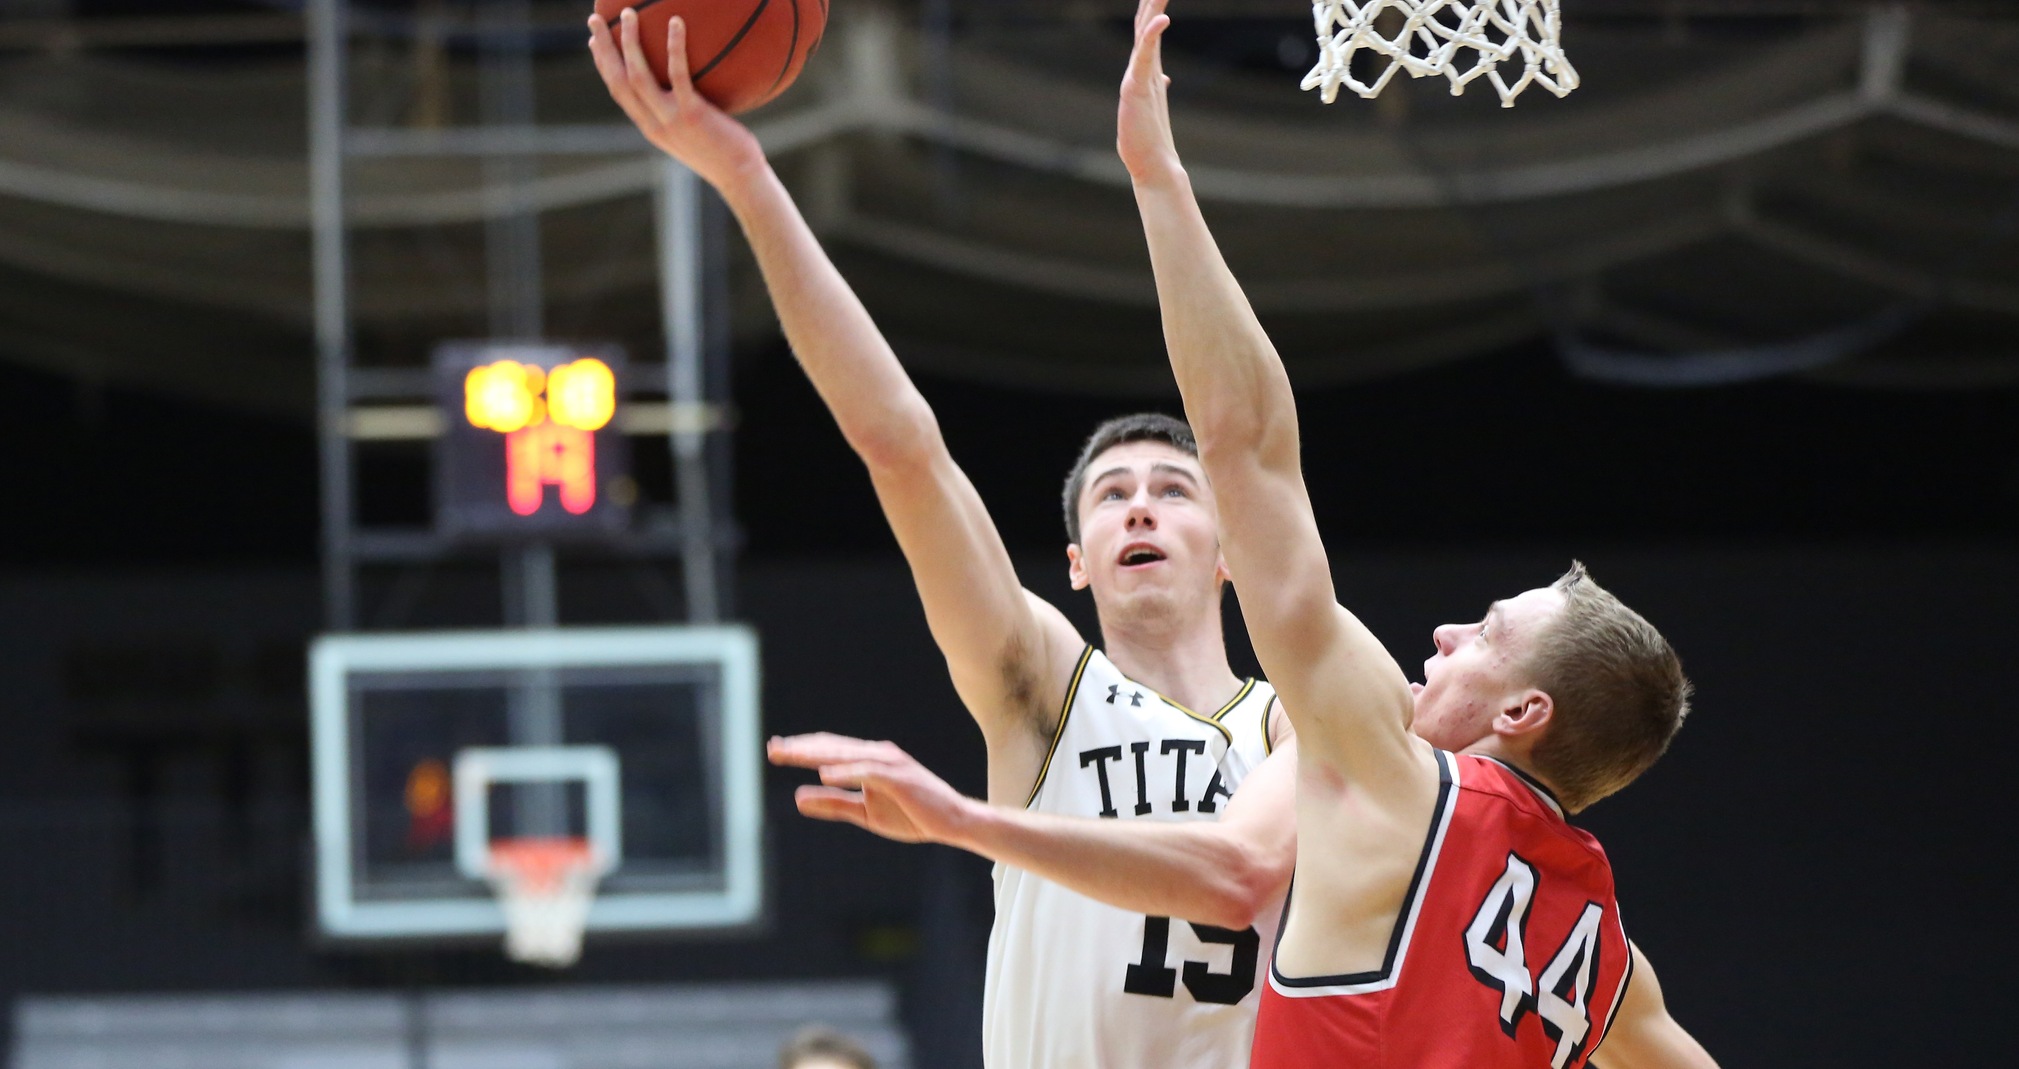 Adam Fravert helped the Titans win their 17th straight game by scoring 24 points with three rebounds and three blocked shots.